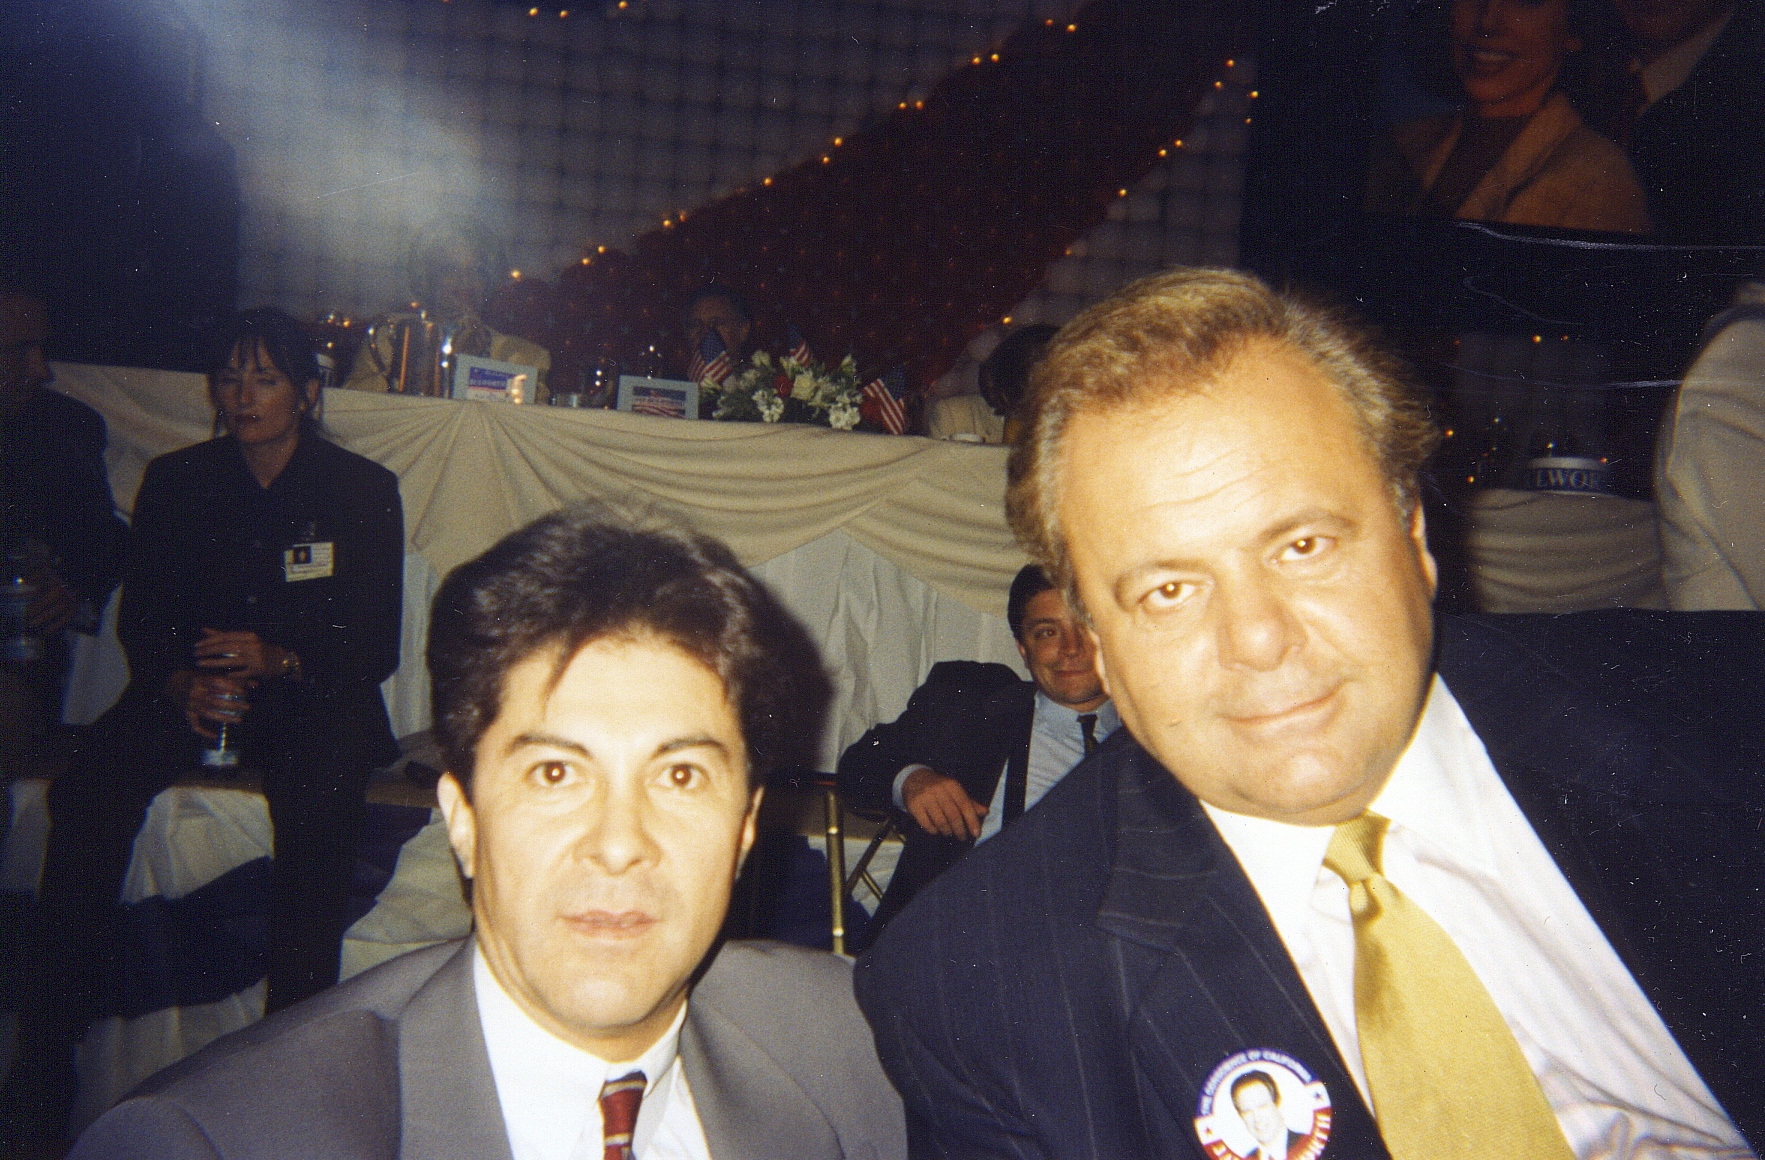 Ron and Paul Sorvino on set Filming.